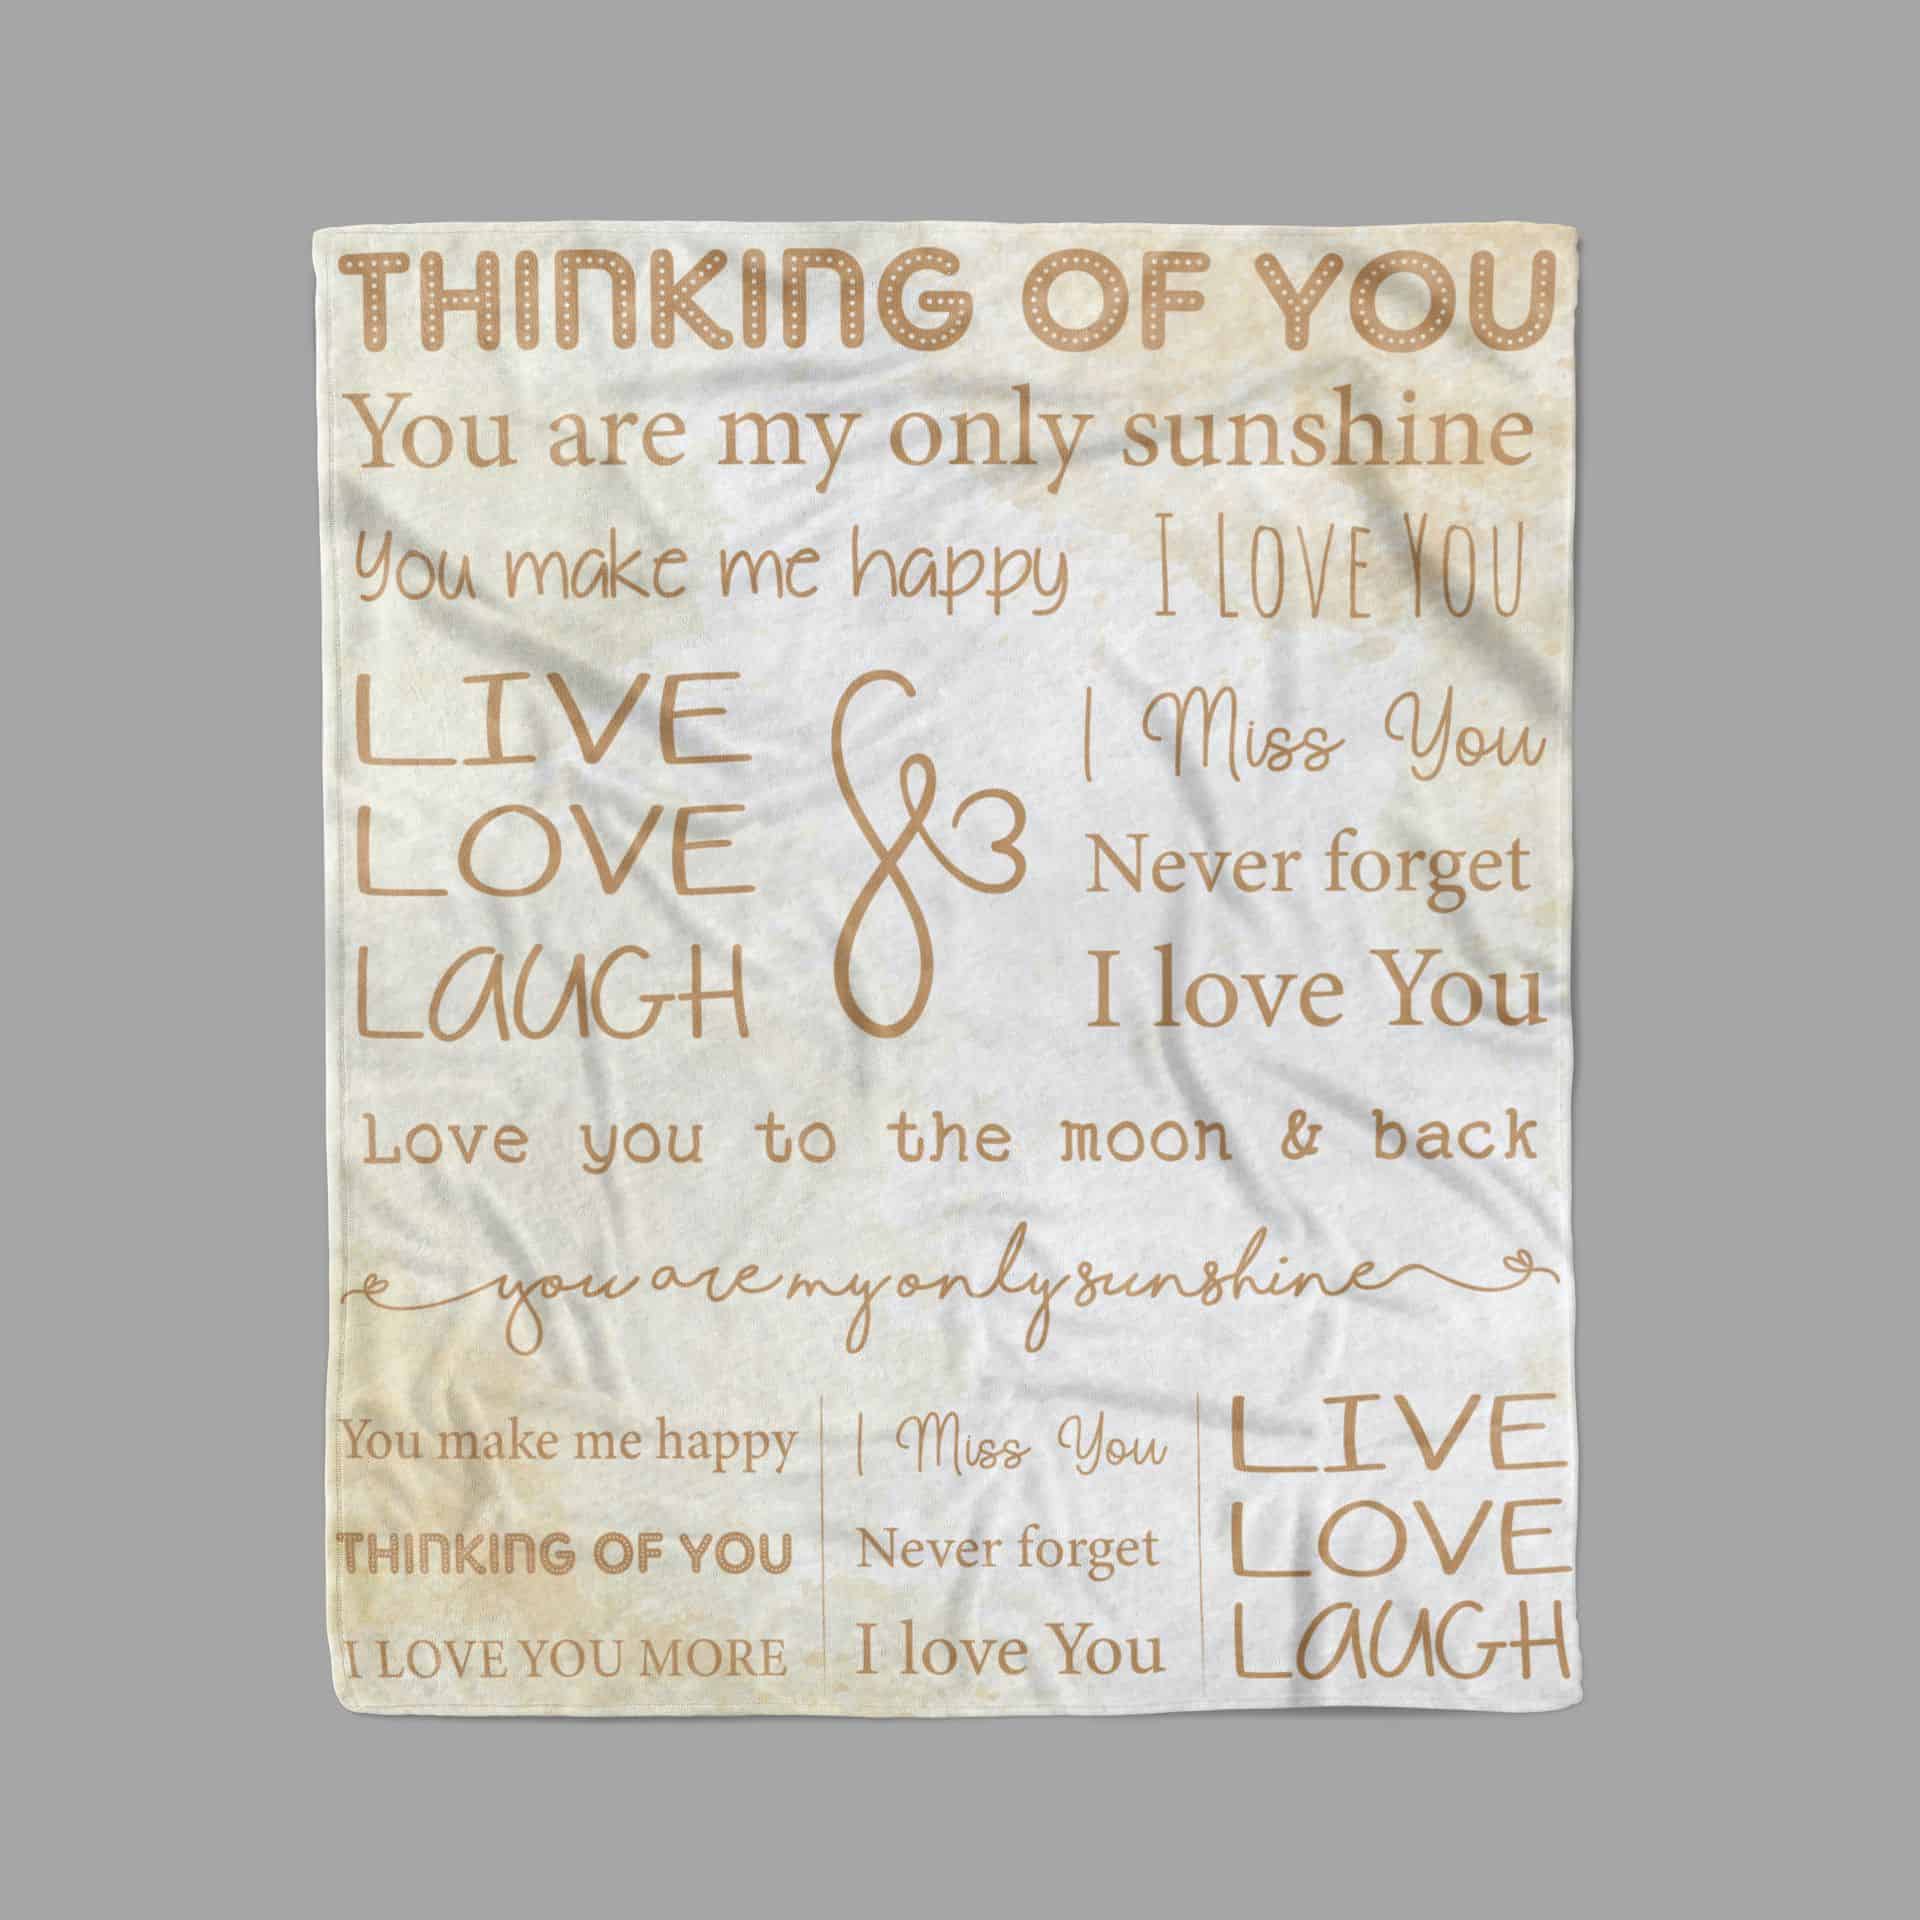 best boyfriend gifts: I Love You – Thinking of You Blanket